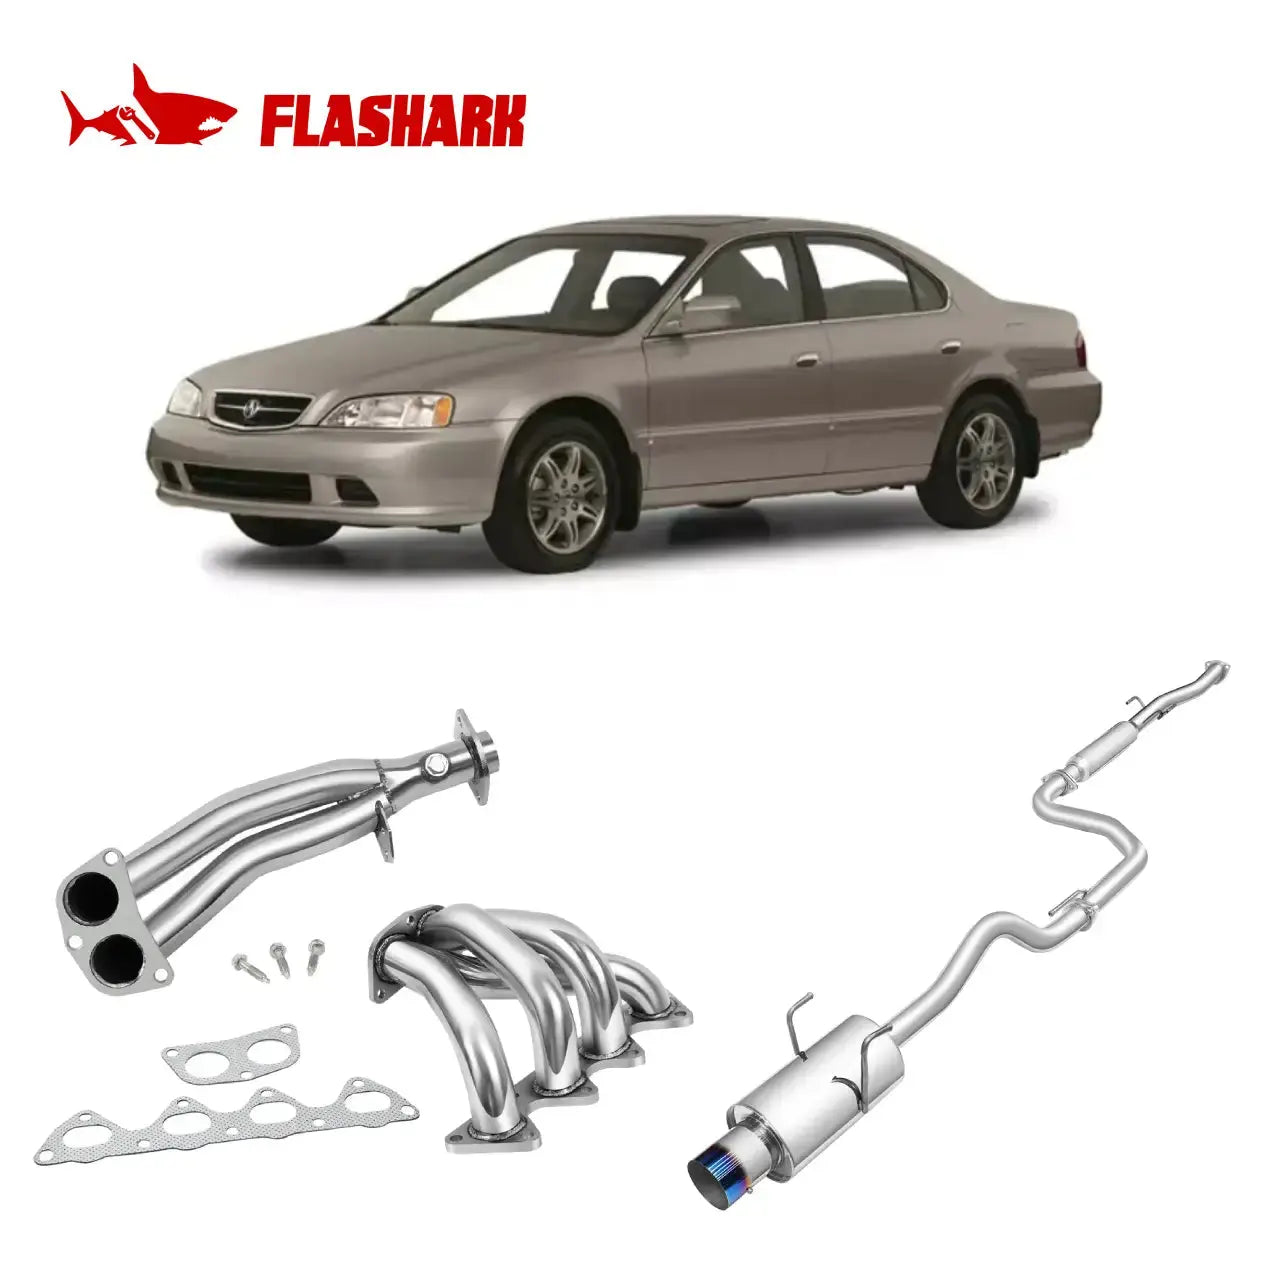 Exhaust Header/Catback All-In-One Kit for 1994-2001 Honda Acura Integra GS/RS/LS Flashark